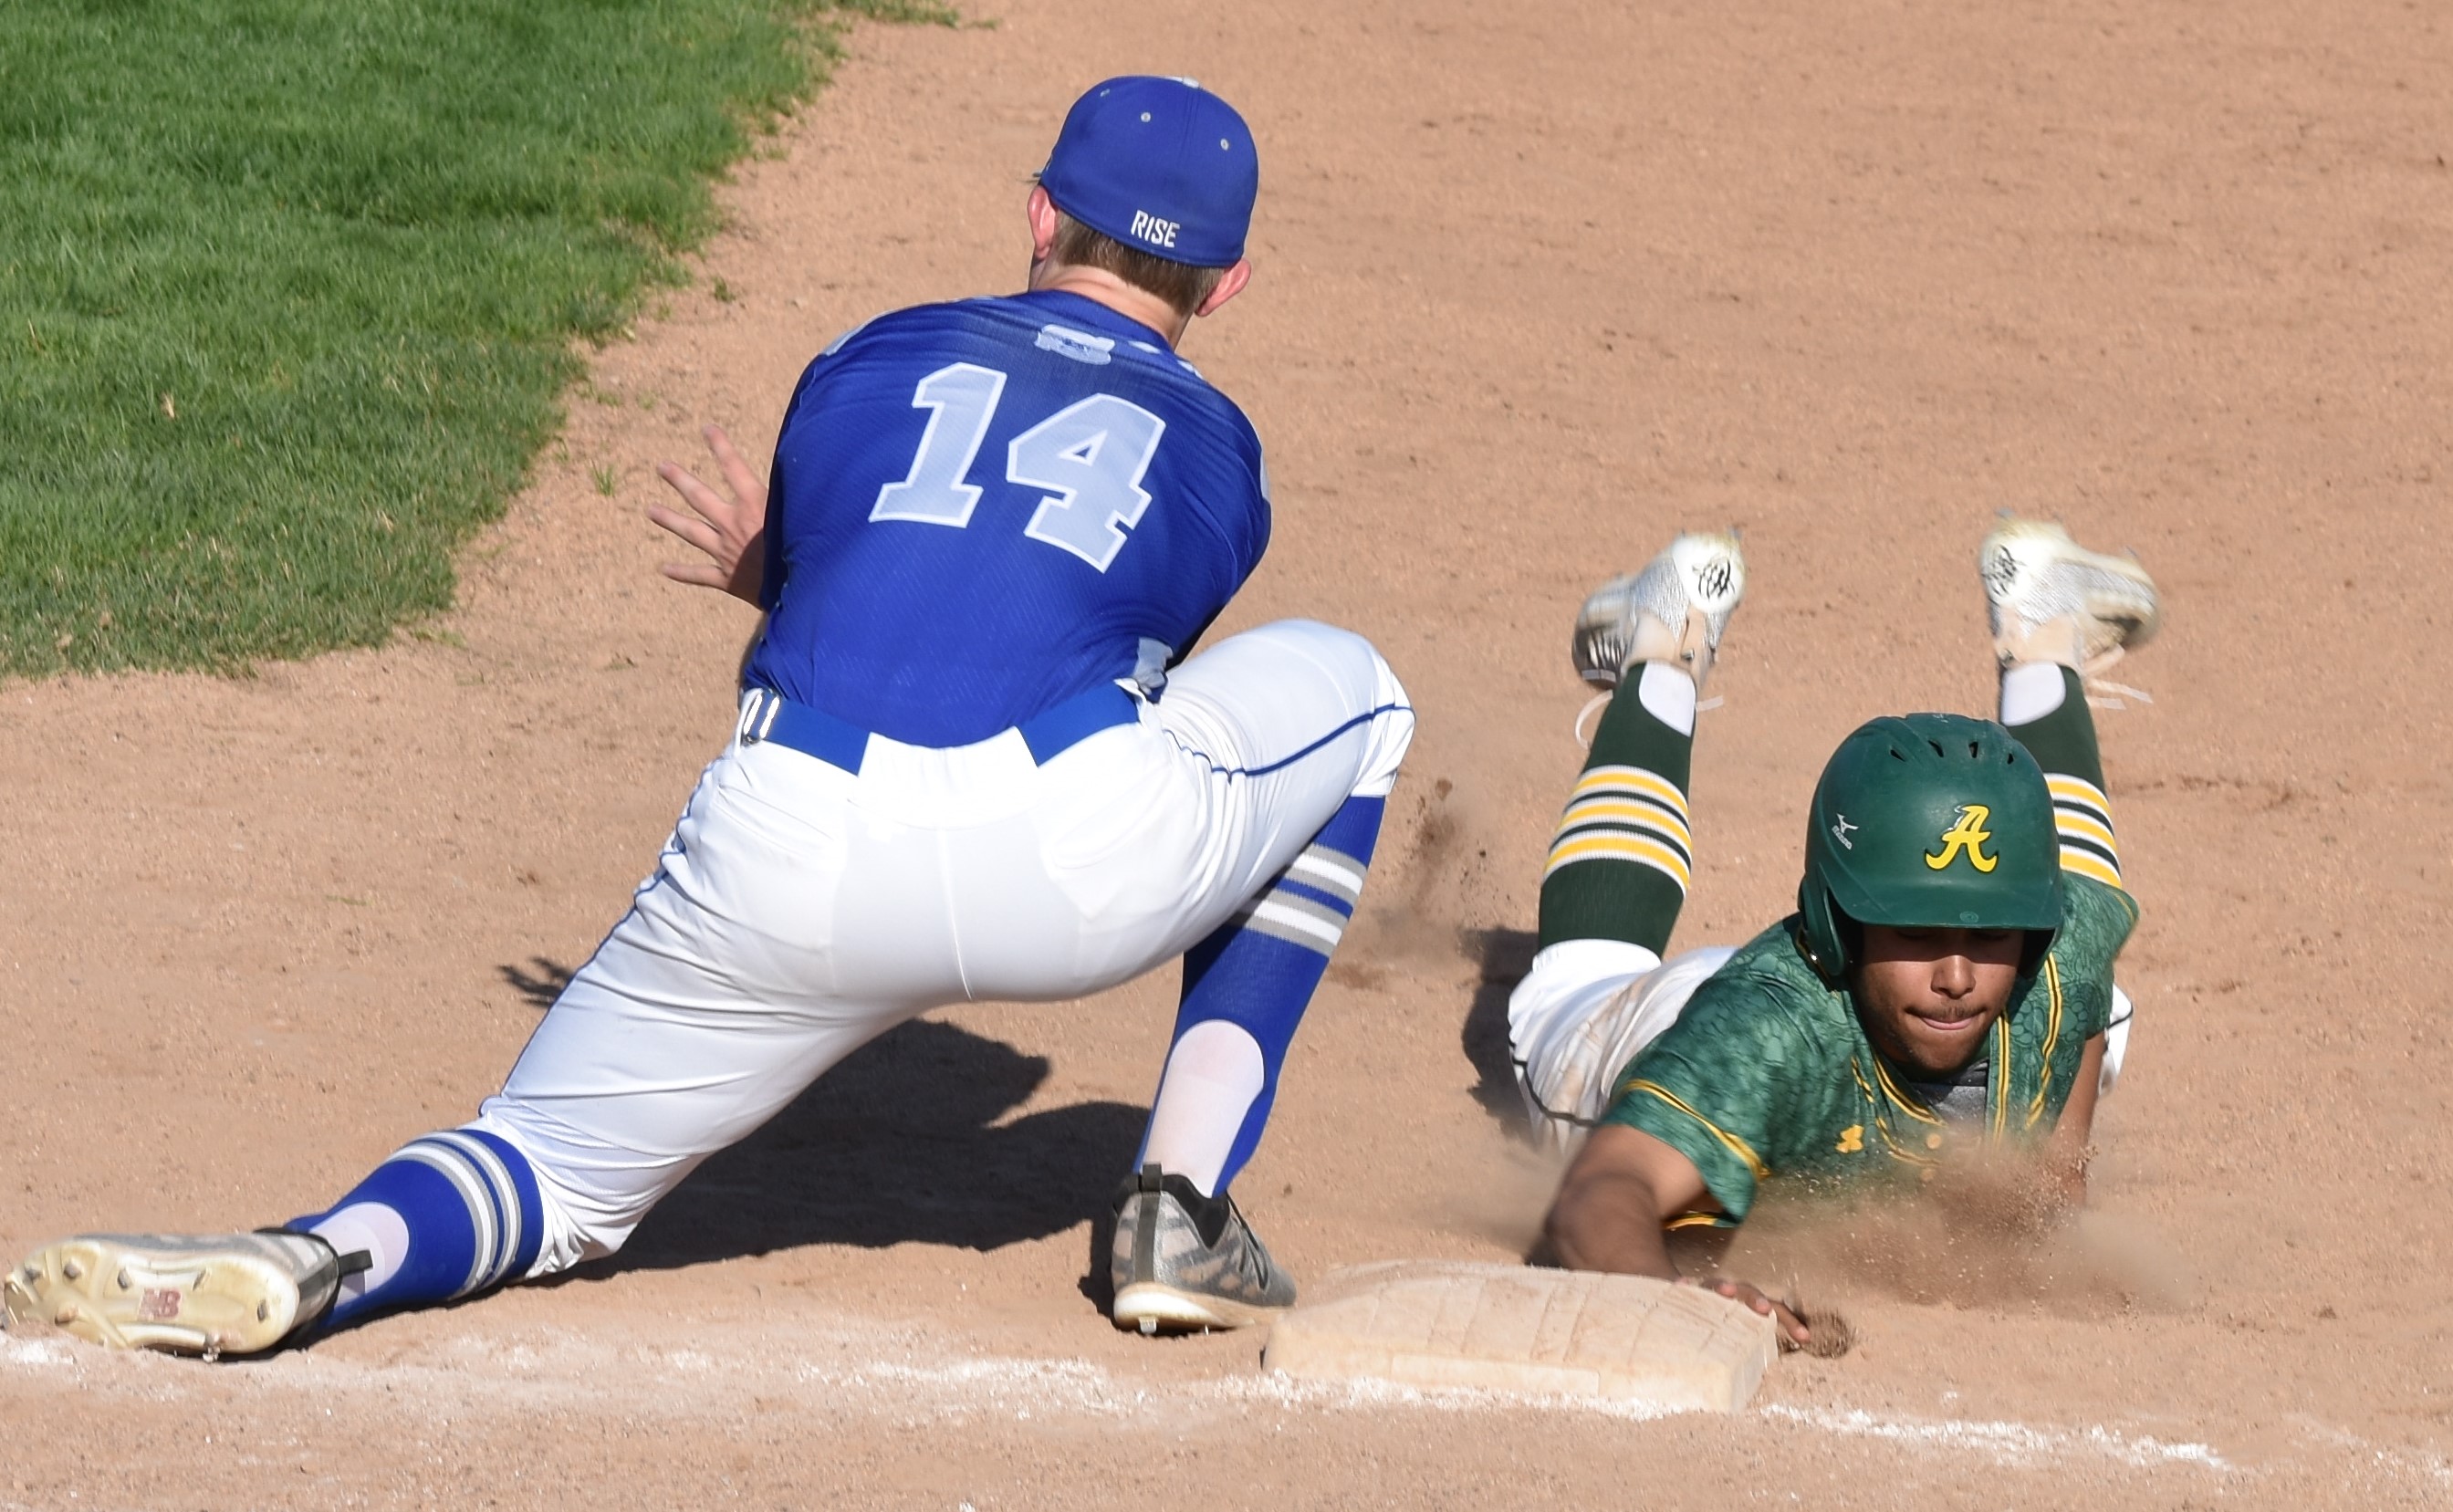 Jaguars Roundup: Adair is unanimous first team all-conference baseball selection